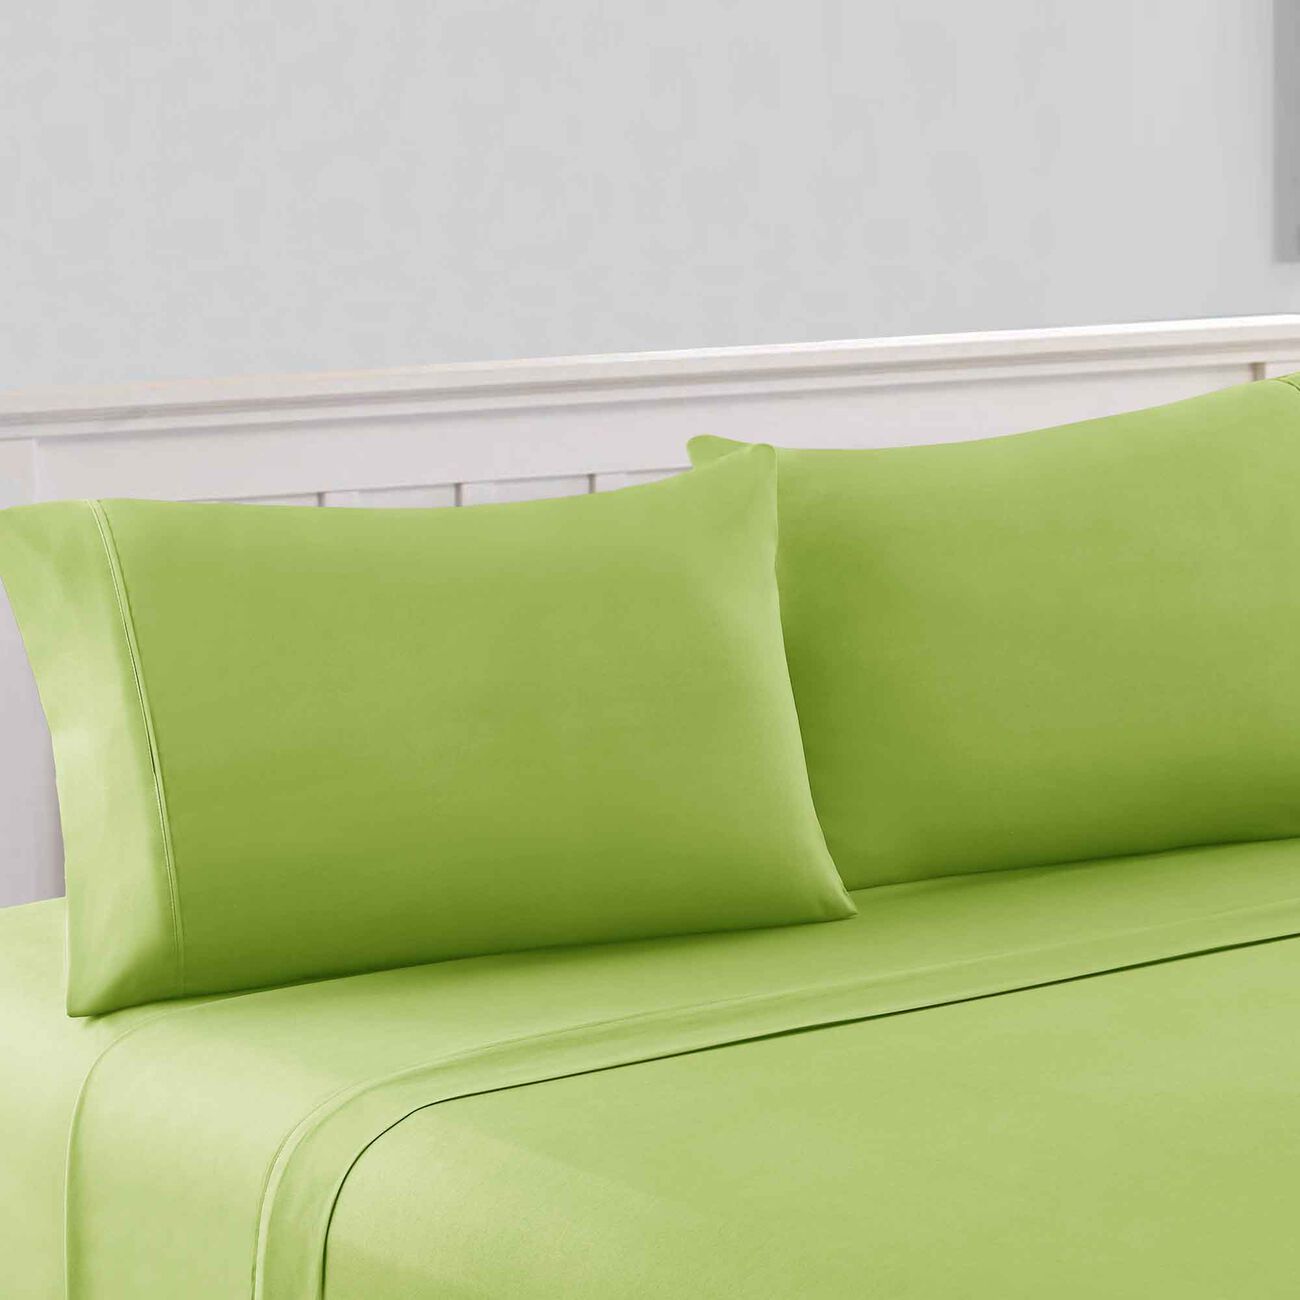 Bezons 4 Piece California King Microfiber Sheet Set with 1800 Thread Count, Green